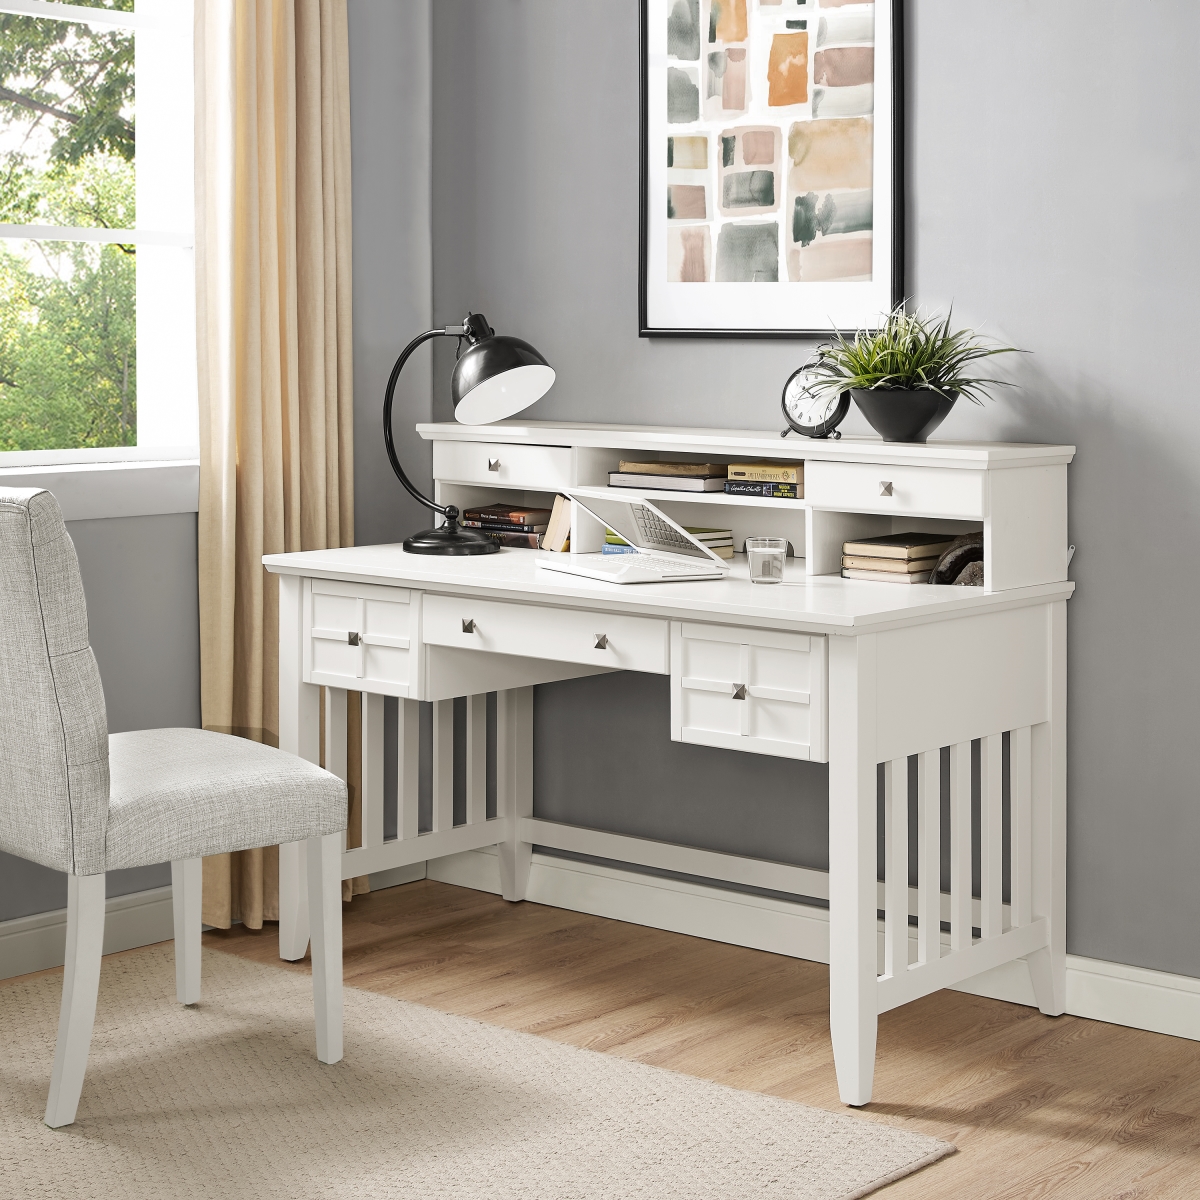 Kf65003wh Adler Computer Desk With Hutch, White